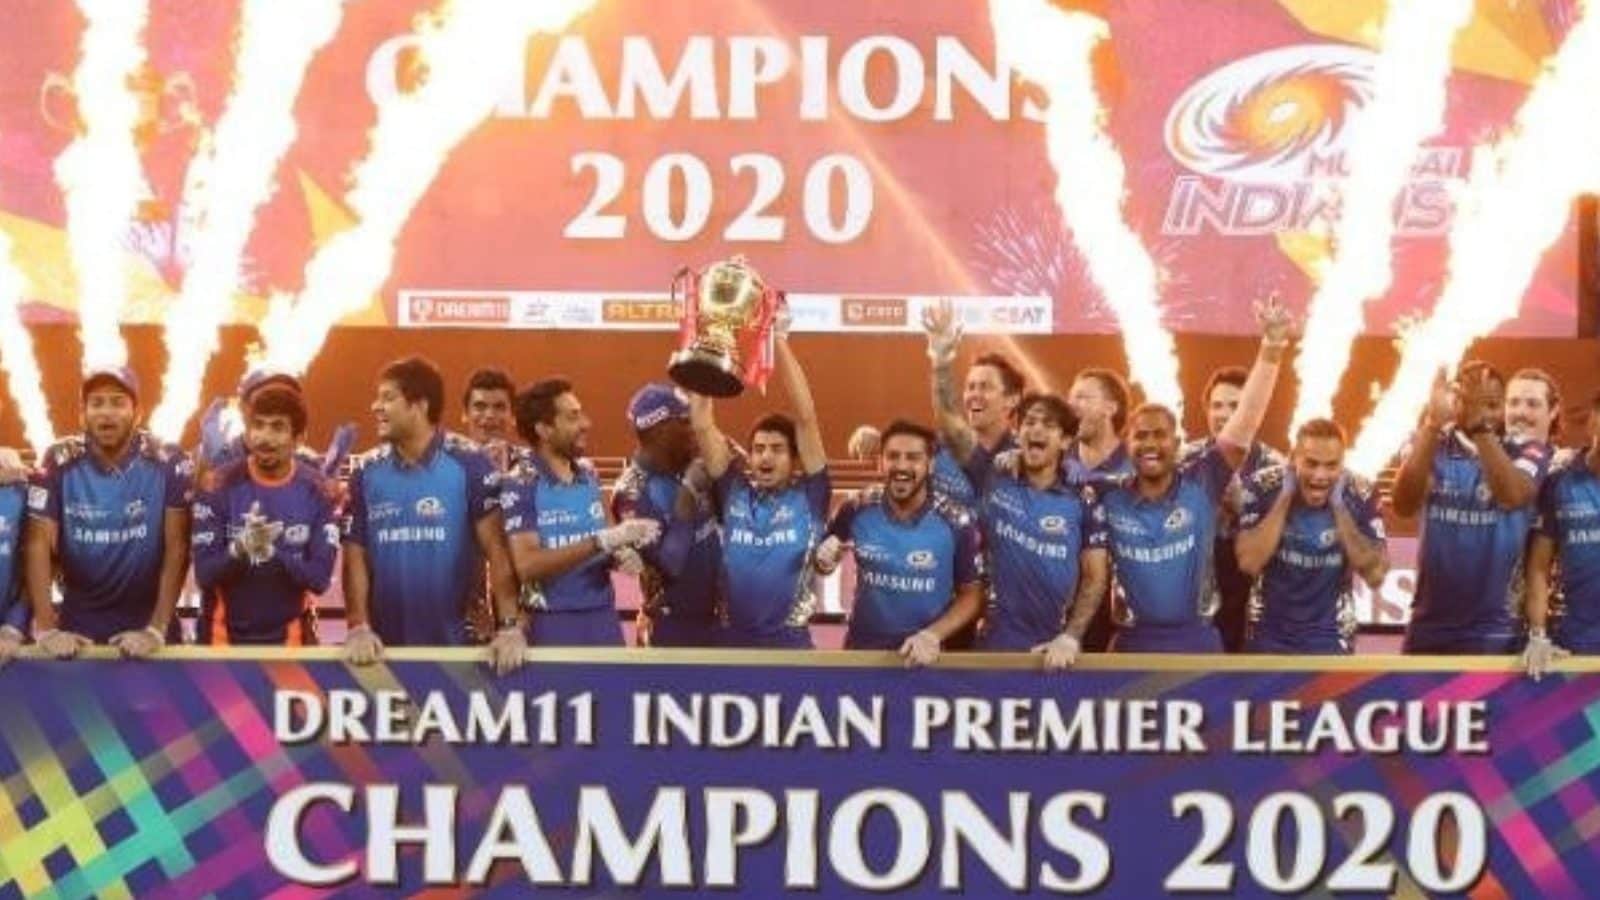 On This Day in 2020: Mumbai Indians Win Record Fifth IPL Title